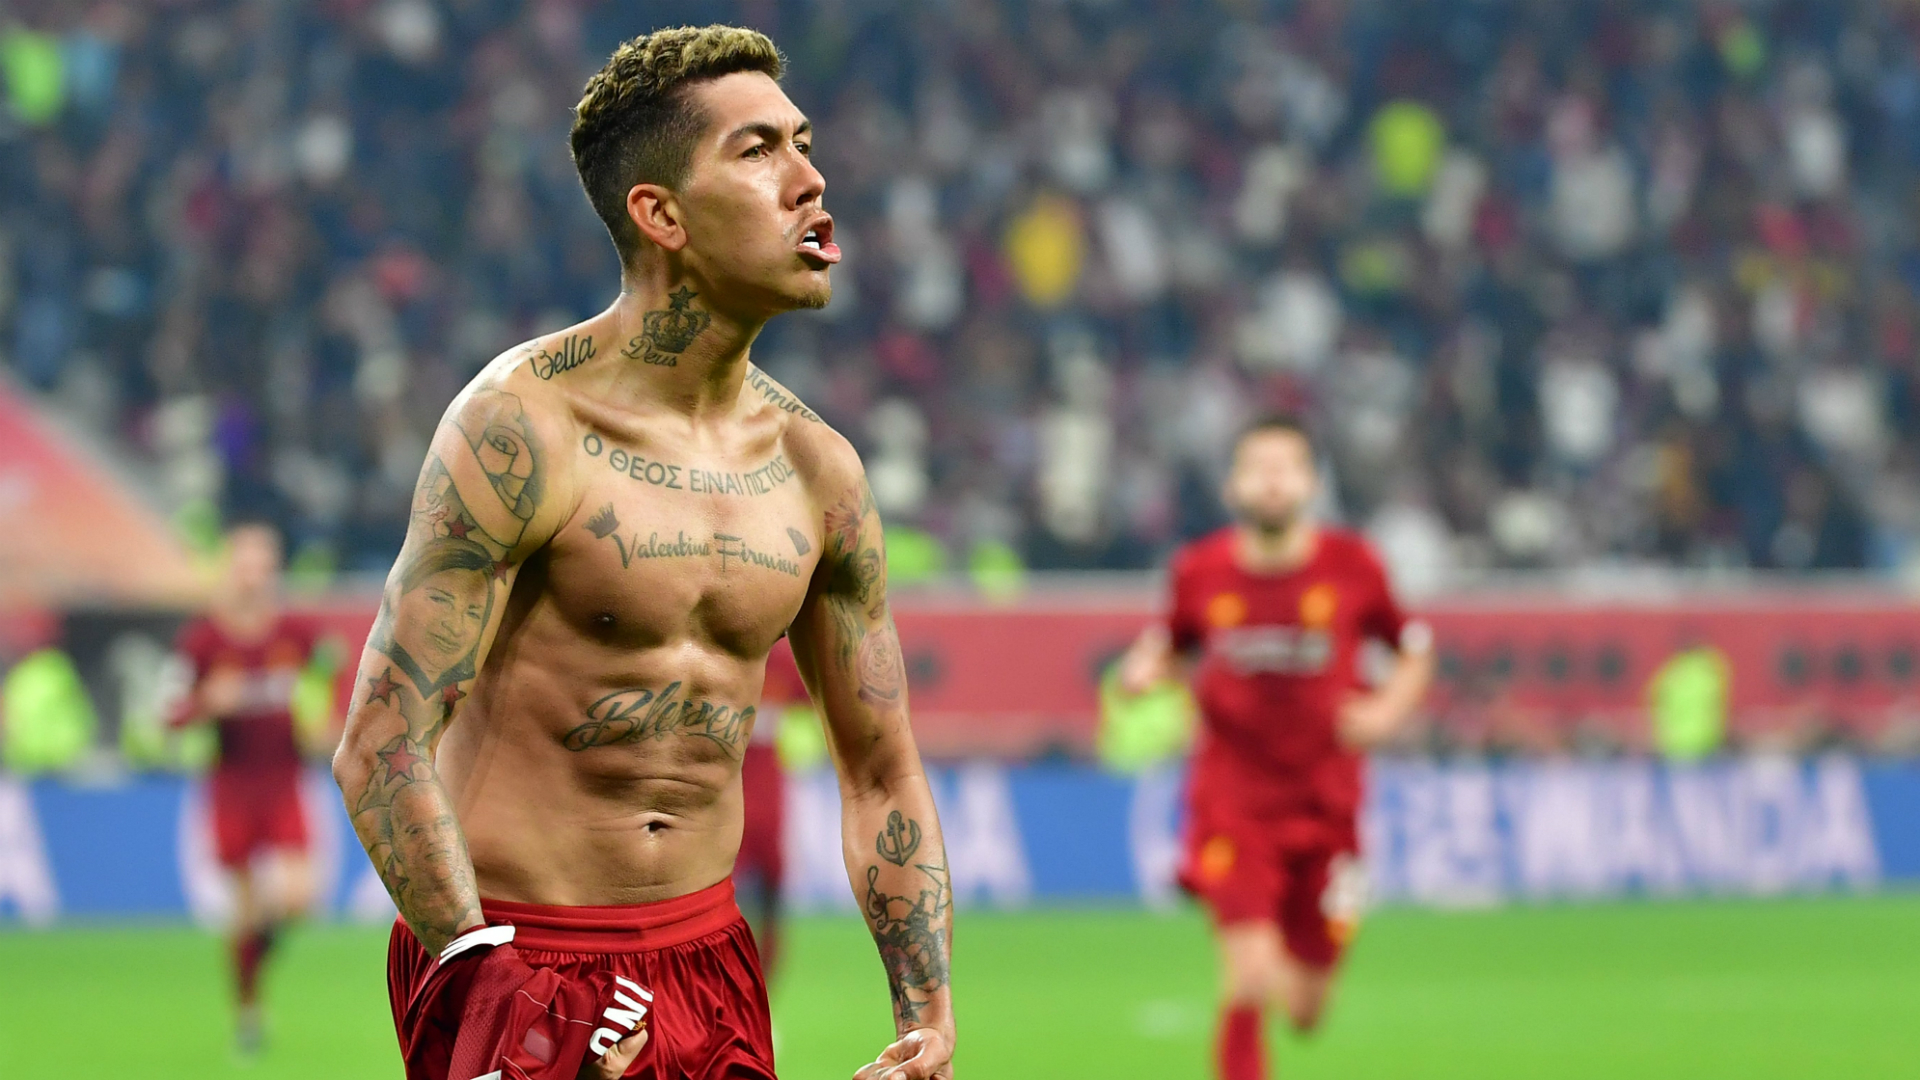 Liverpool 1-0 Flamengo (aet): Firmino clinches first Club World Cup title in extra time